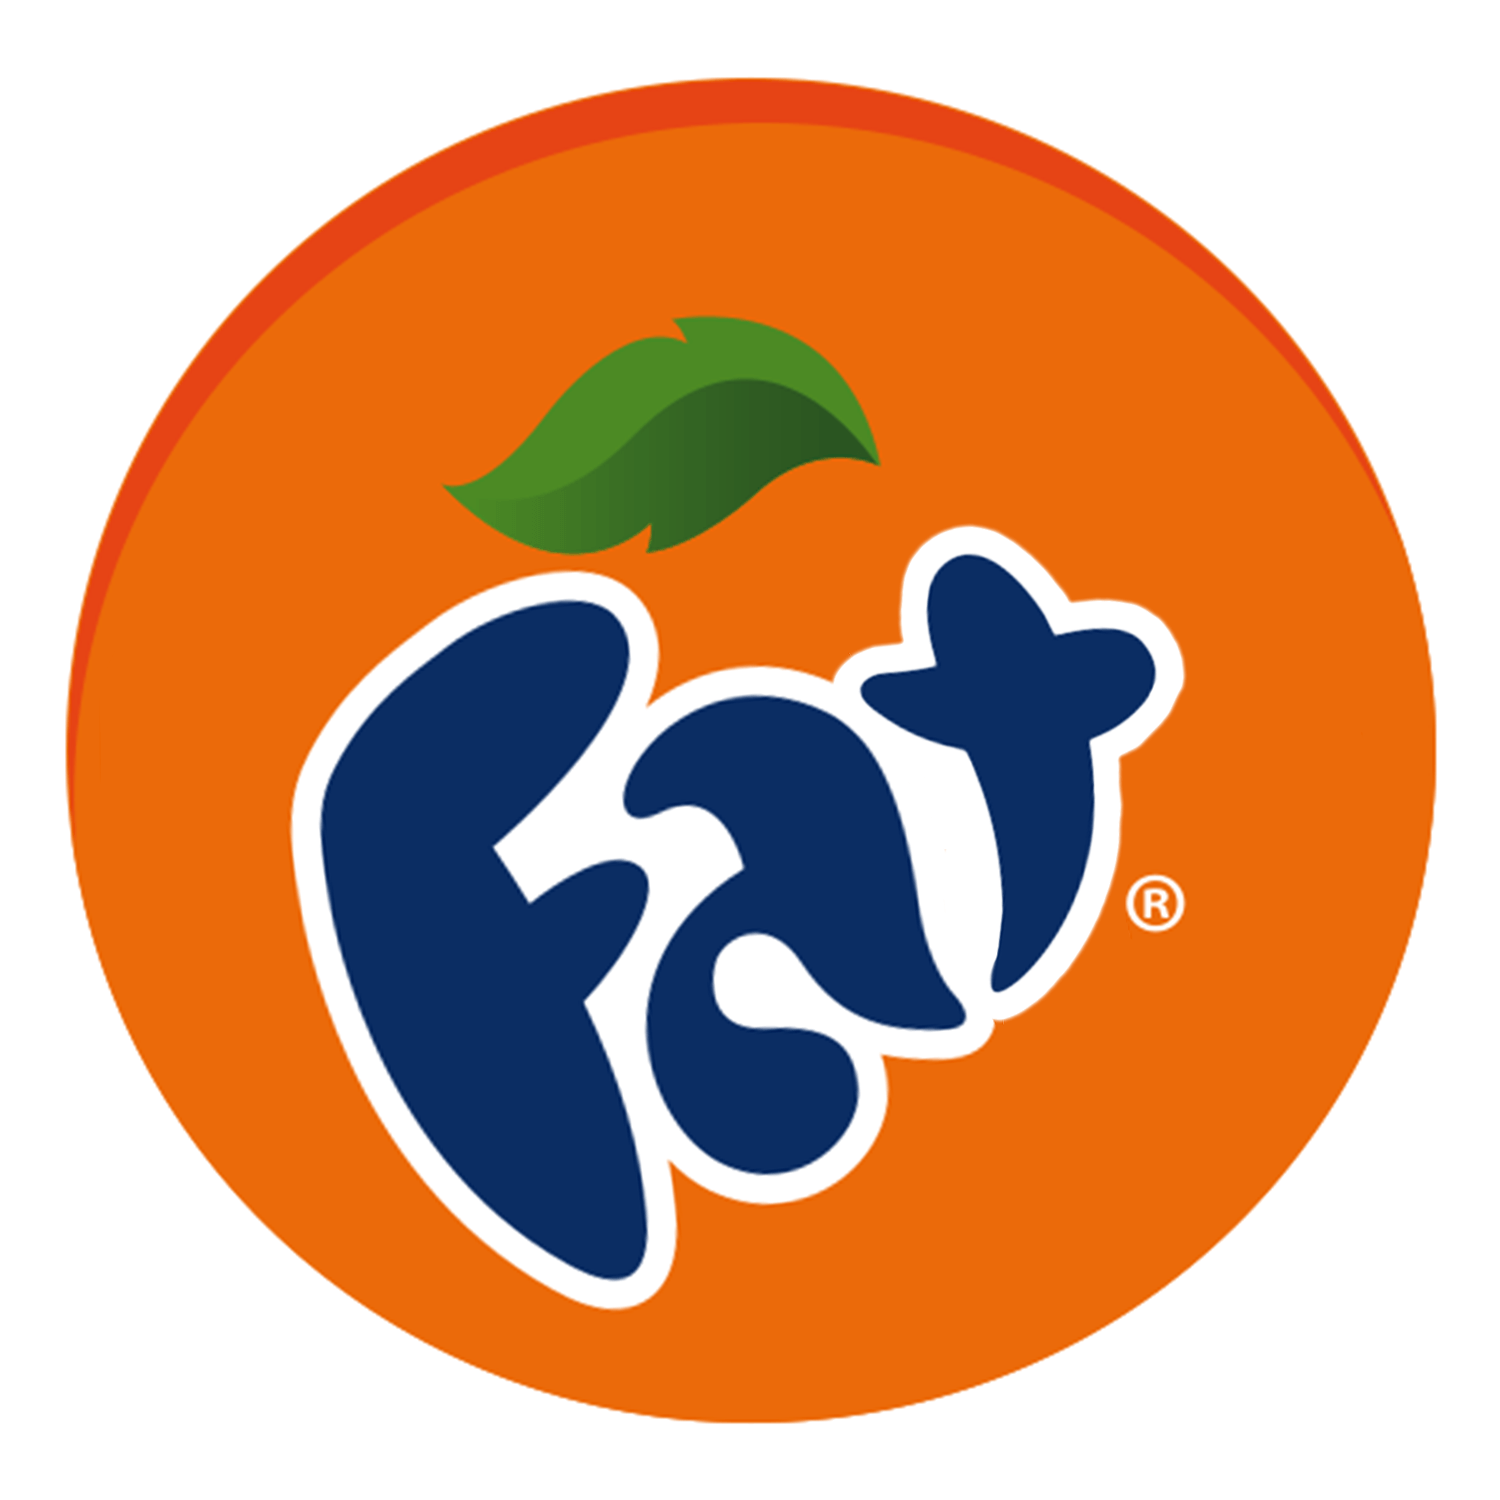 Appropriate Logo - Fanta thinking about a logo change to be more appropriate